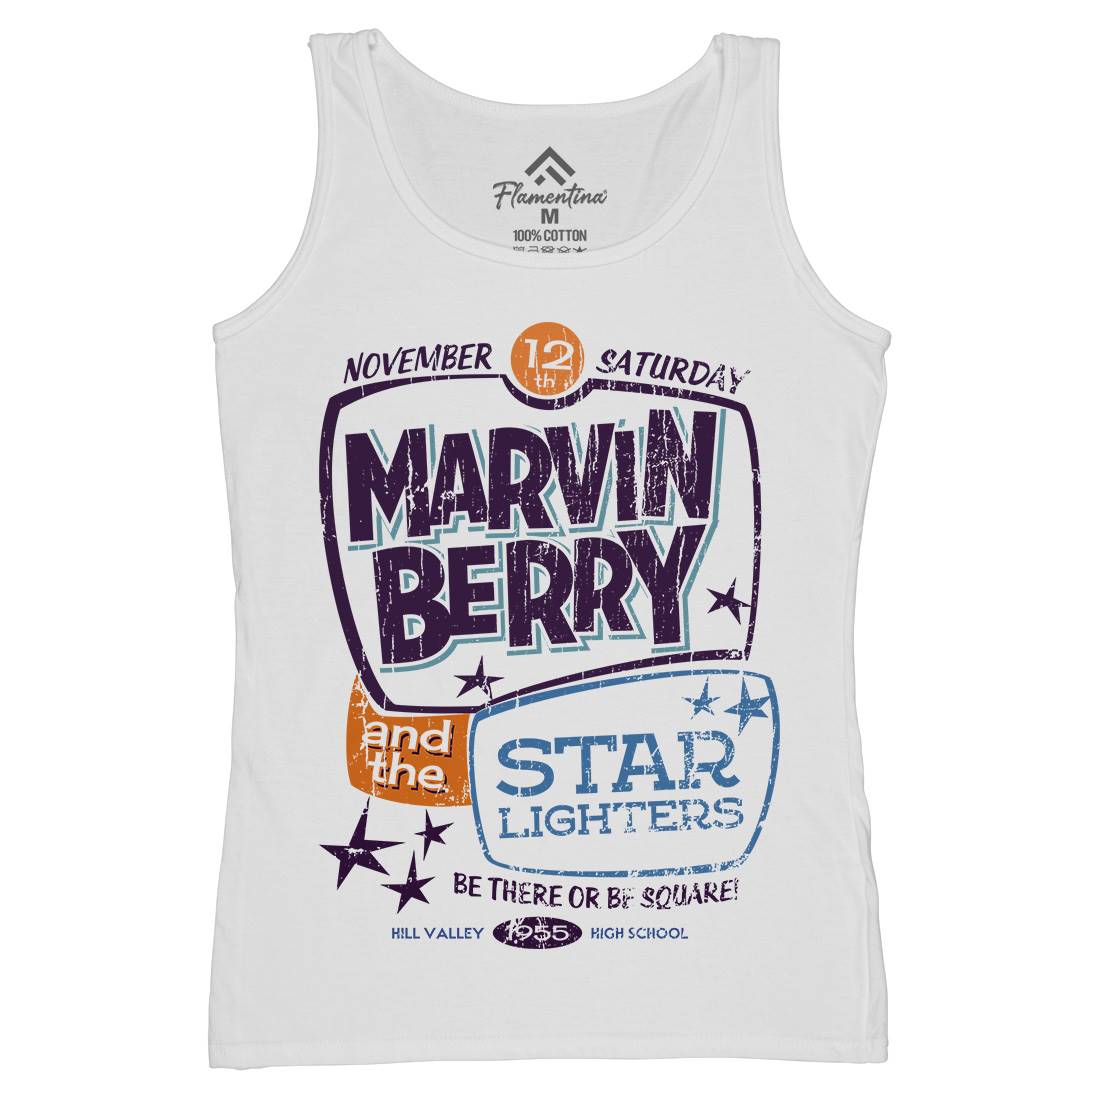 Marvin Berry And The Starlighters Womens Organic Tank Top Vest Music D159